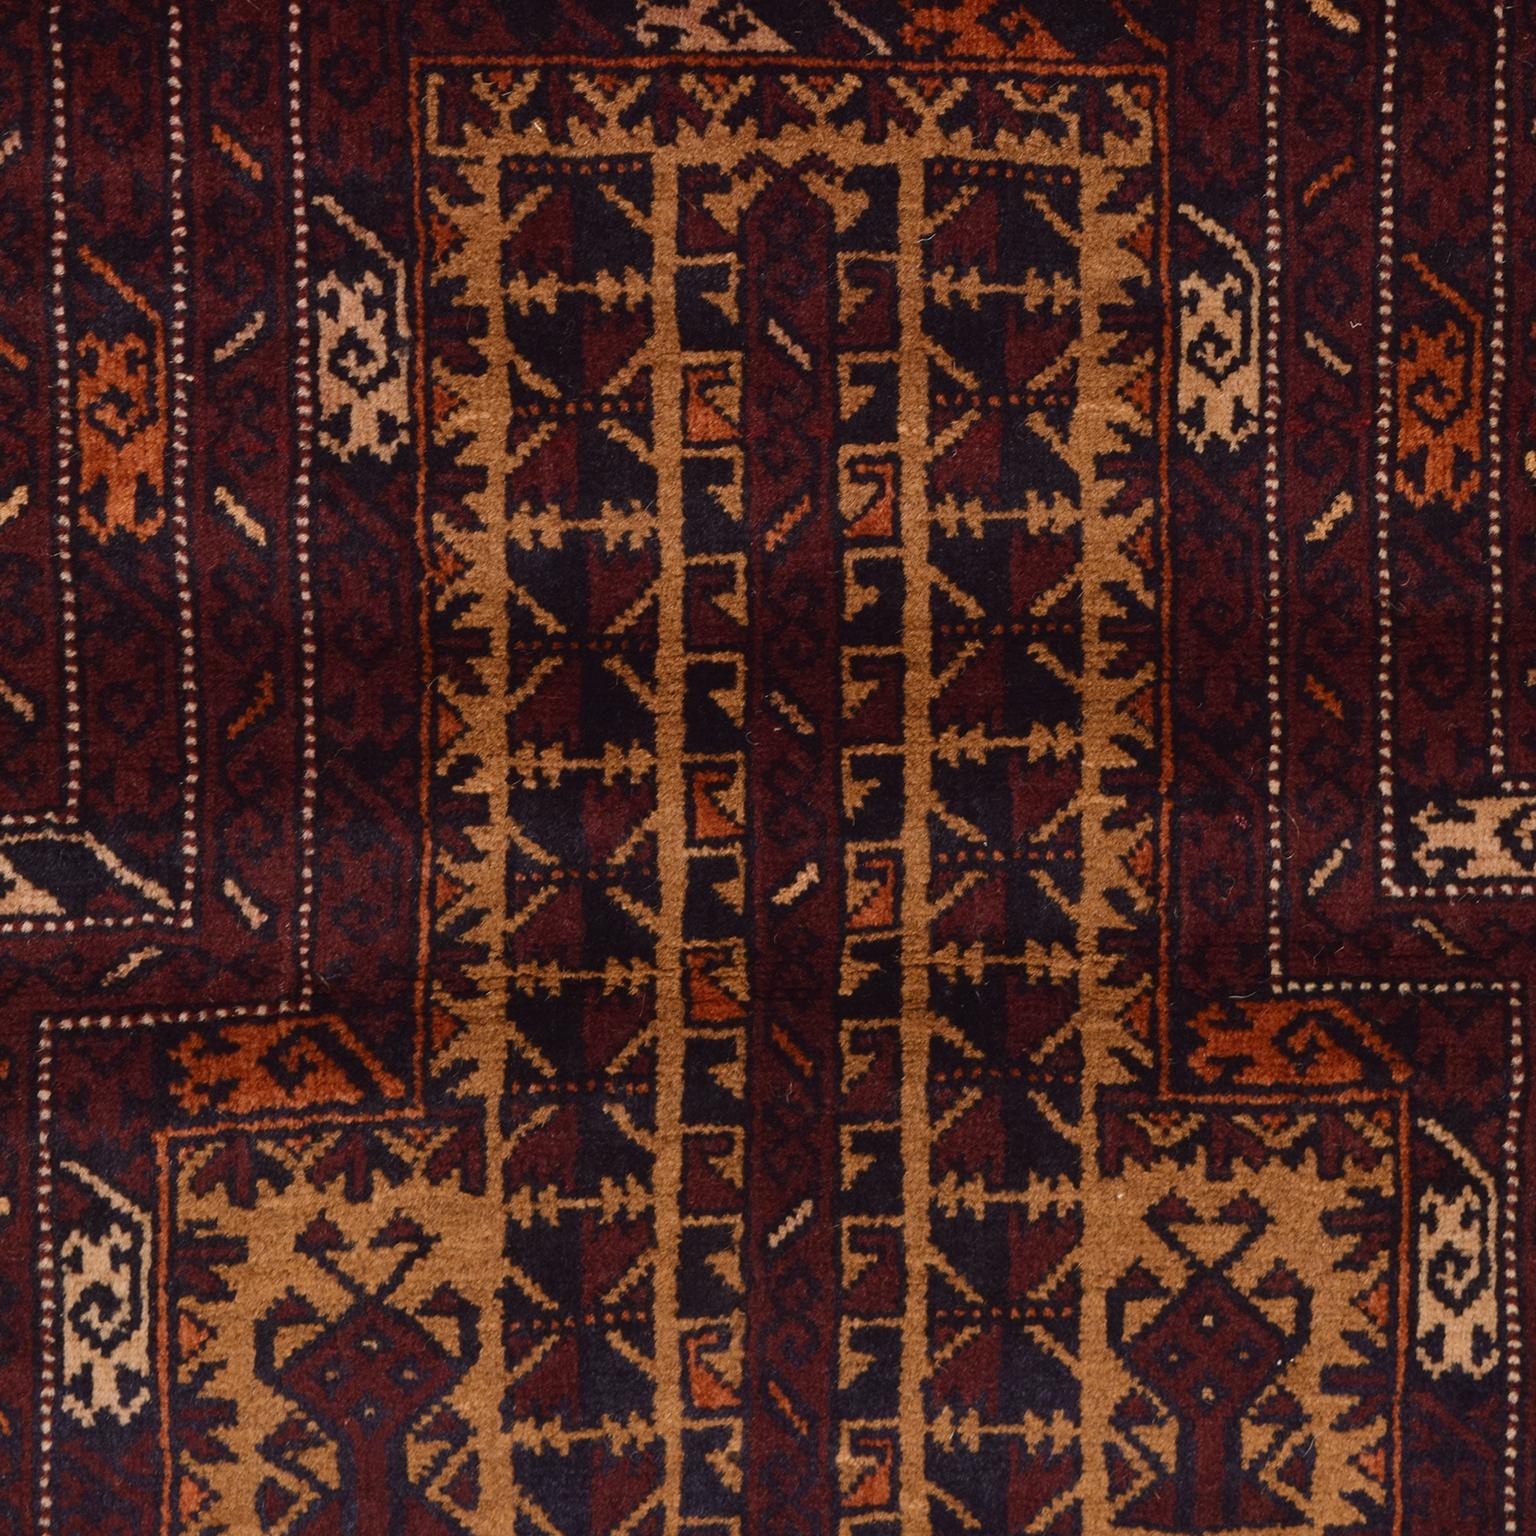 Hand-Knotted Traditional Persian Balouchi Carpet in Maroon, Orange, and Gold Wool